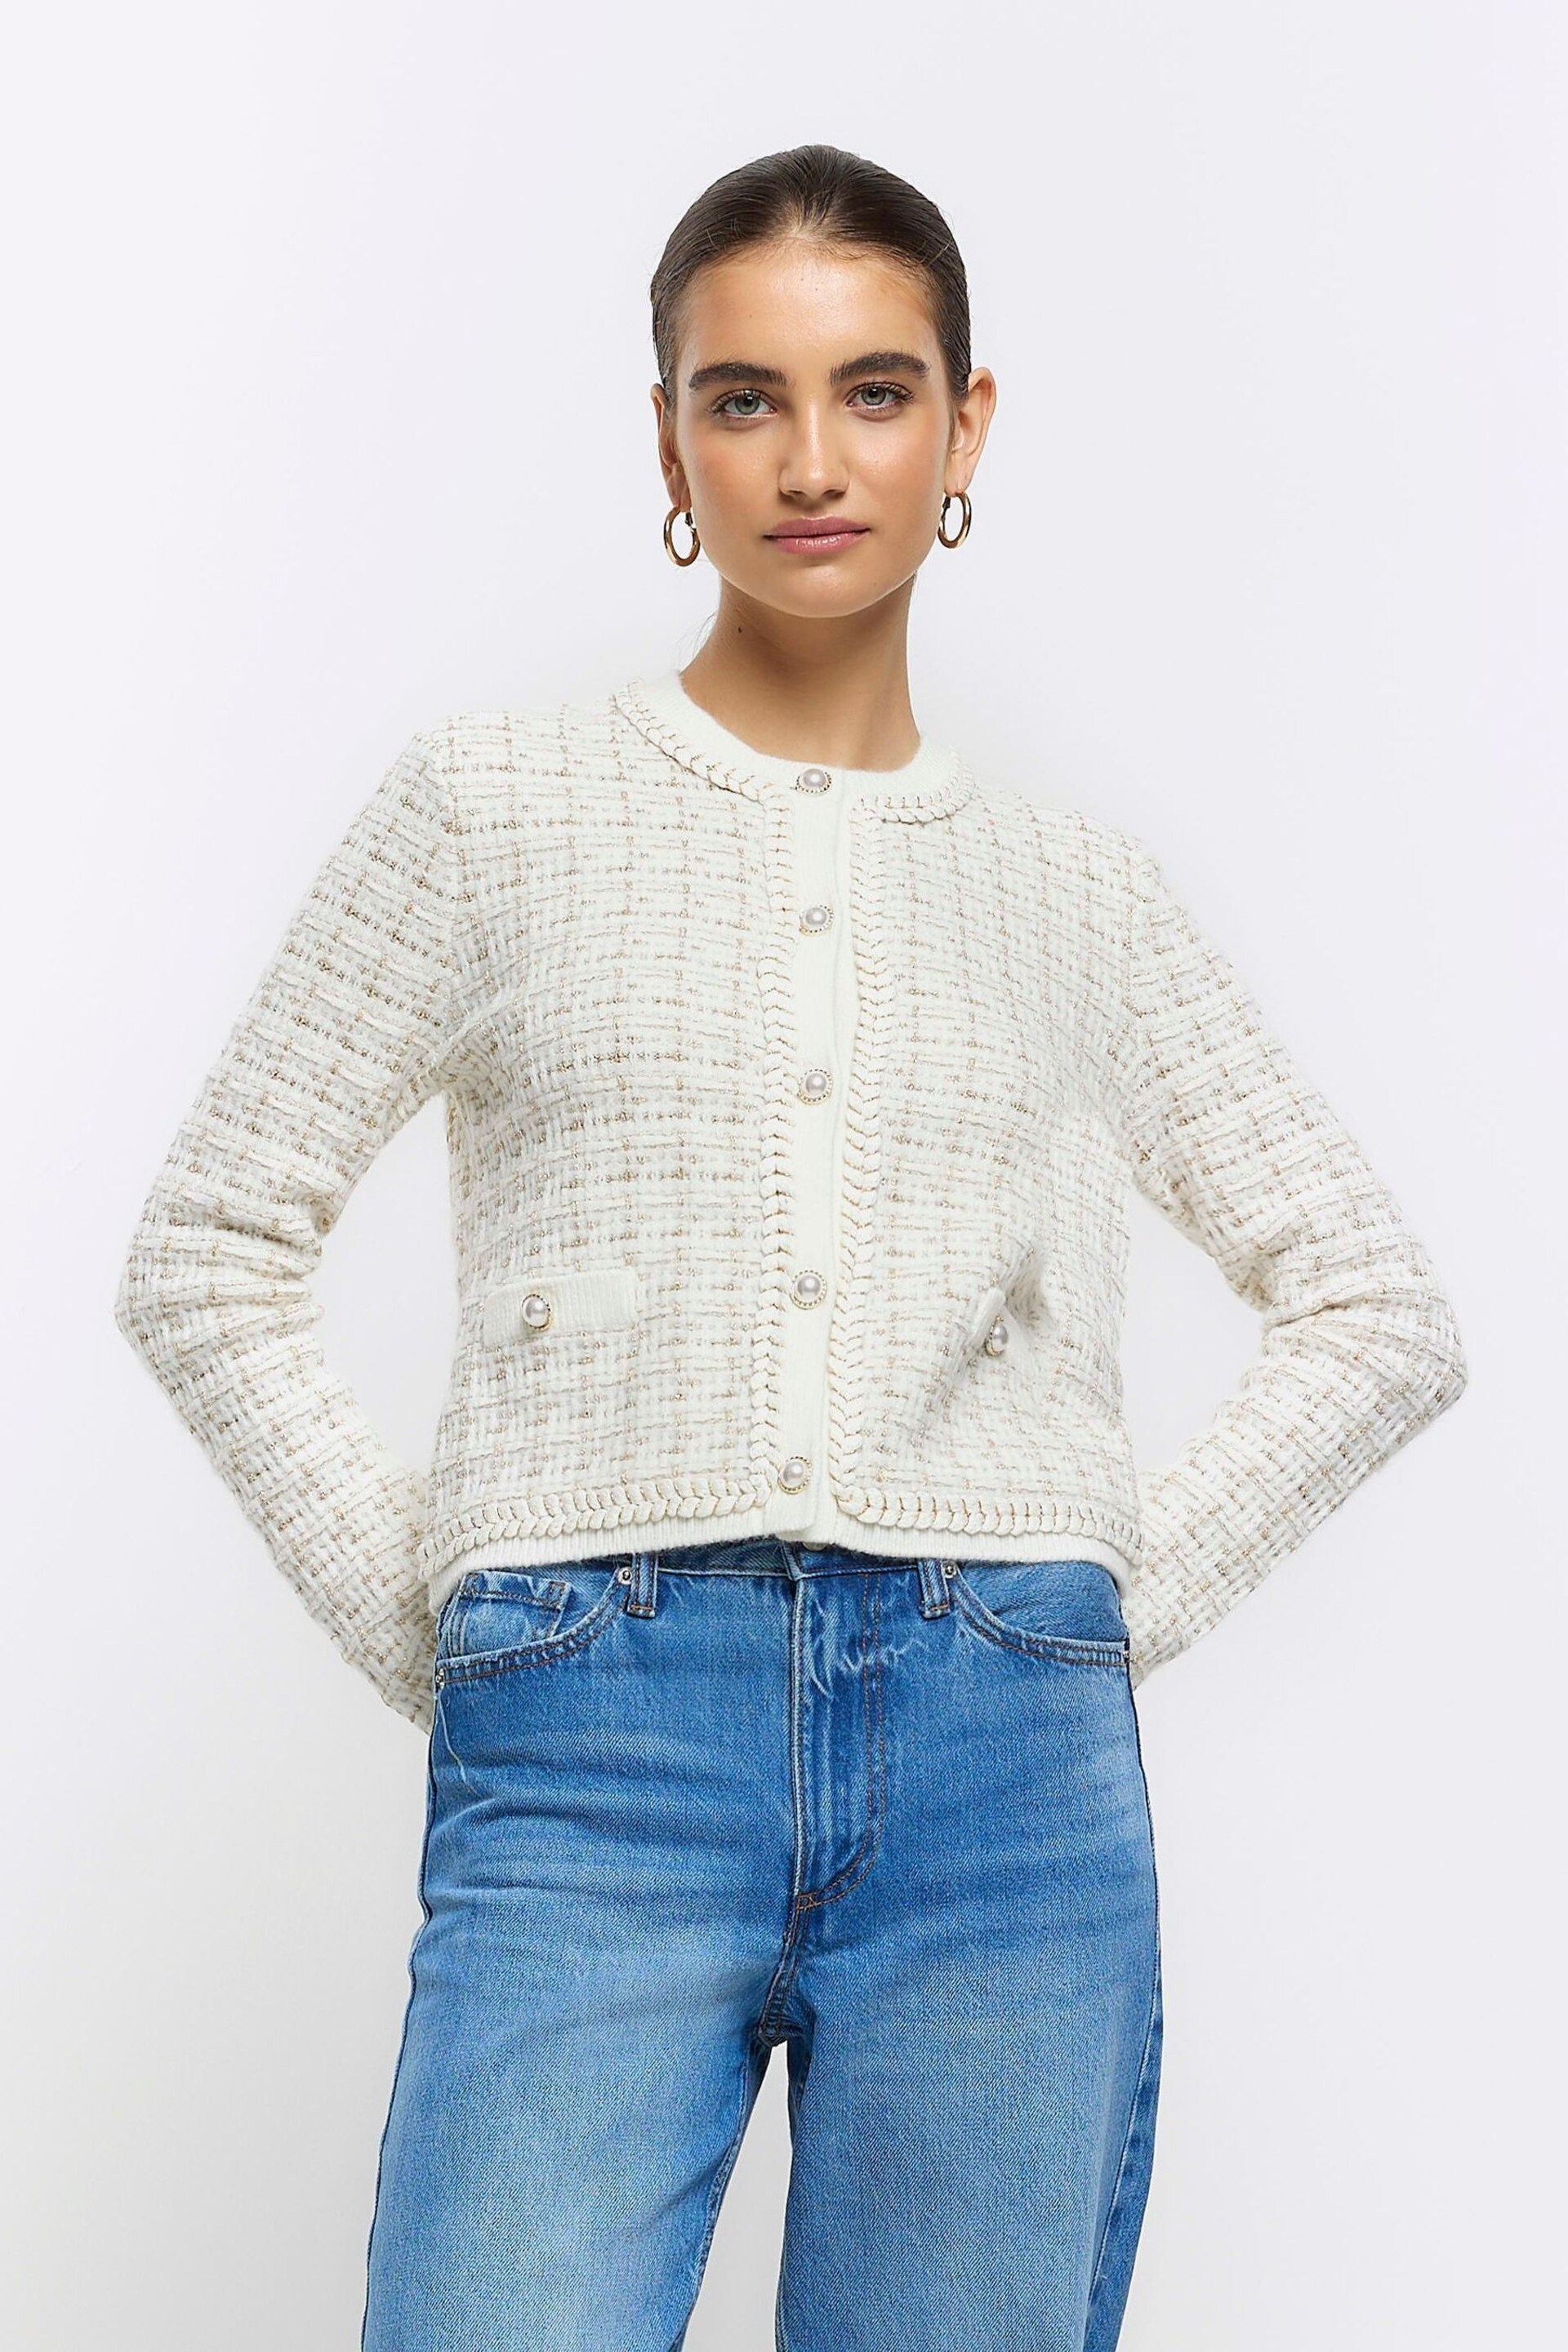 River Island Cream Boucle Cropped Knit Cardigan - Image 1 of 6